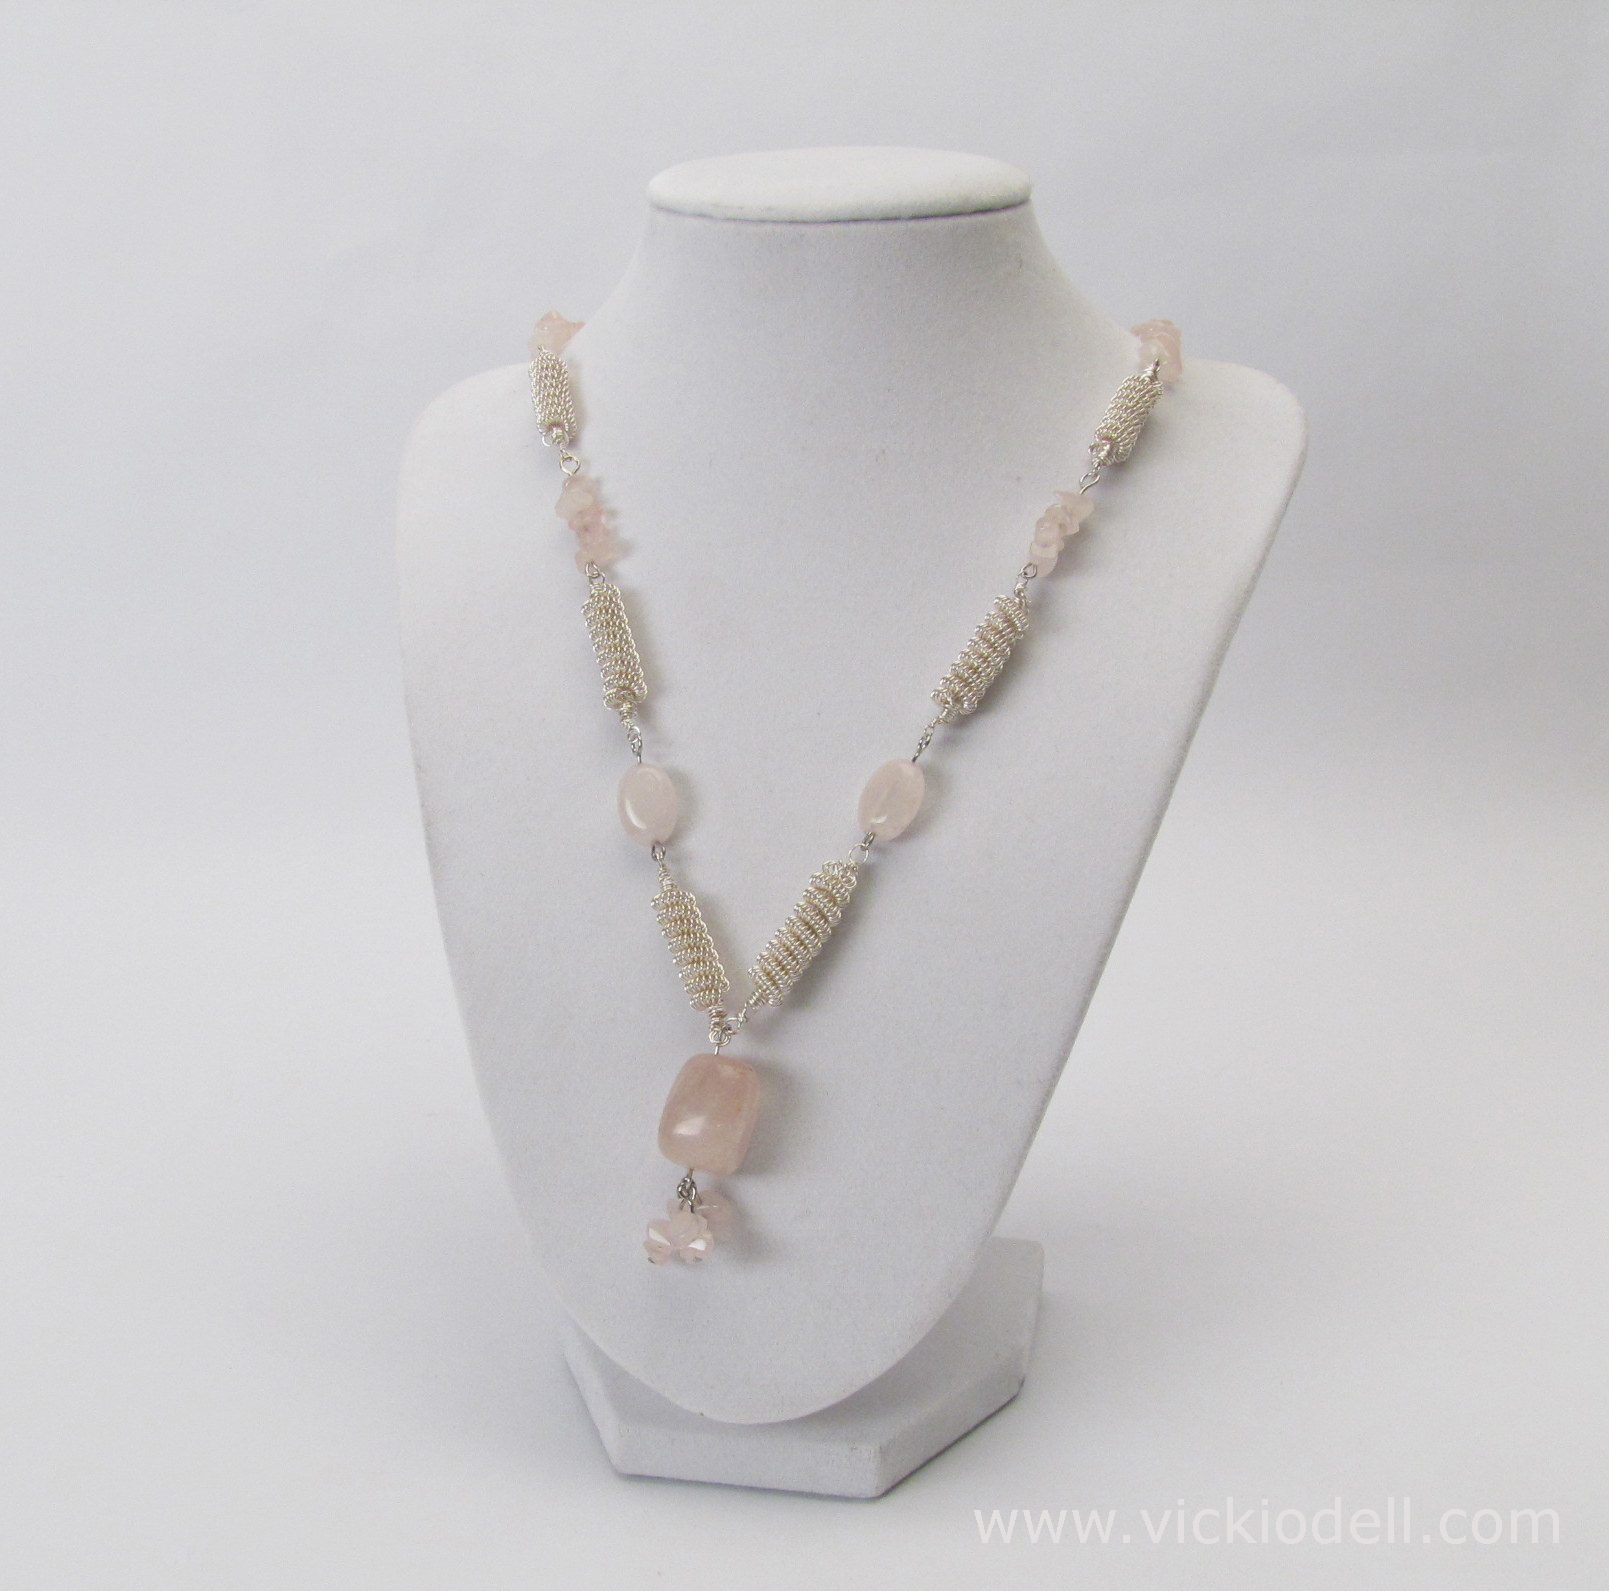 Make a Coiled Wire Bead and Rose Quartz Necklace with the Coiling Gizmo